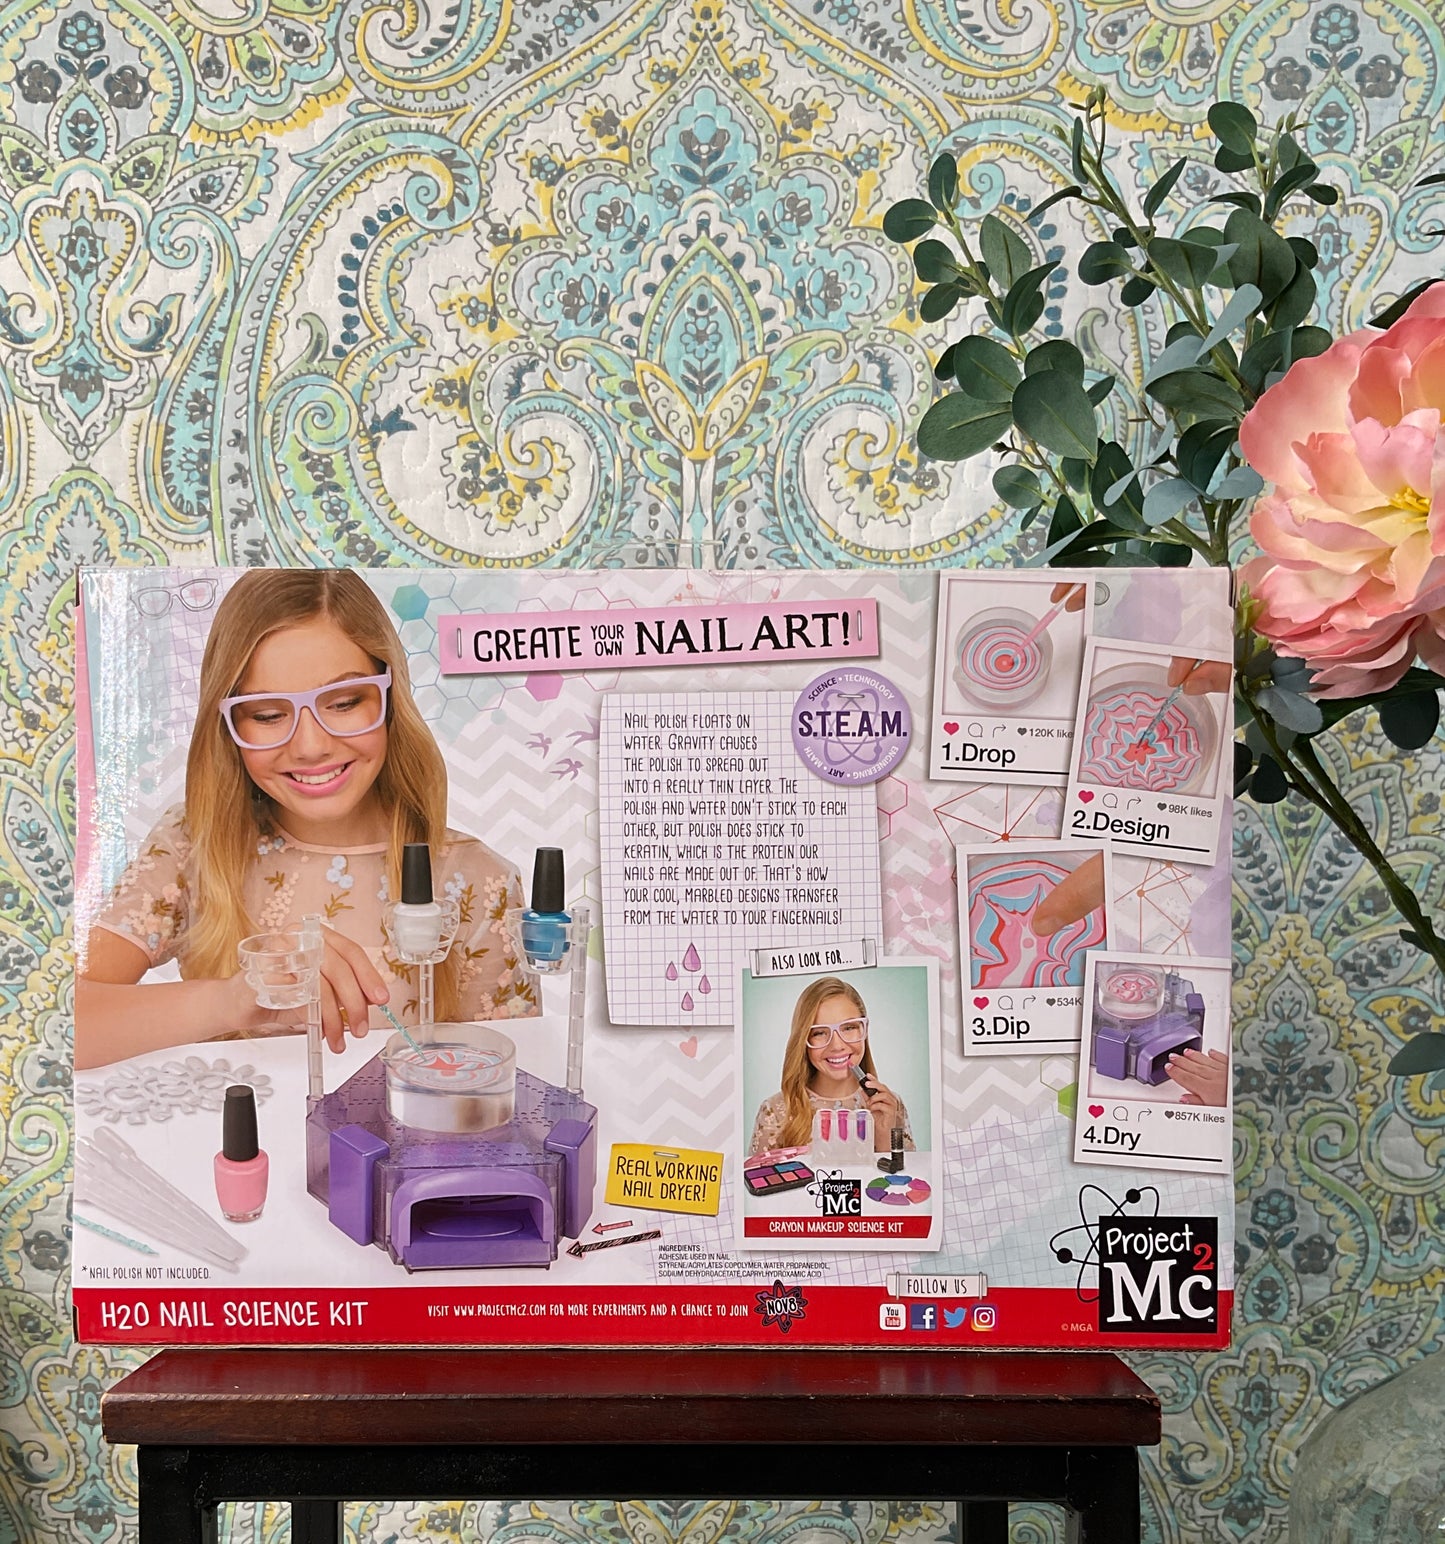 Project MC2 Create Your Own Nail Art, H20 Nail Science Kit